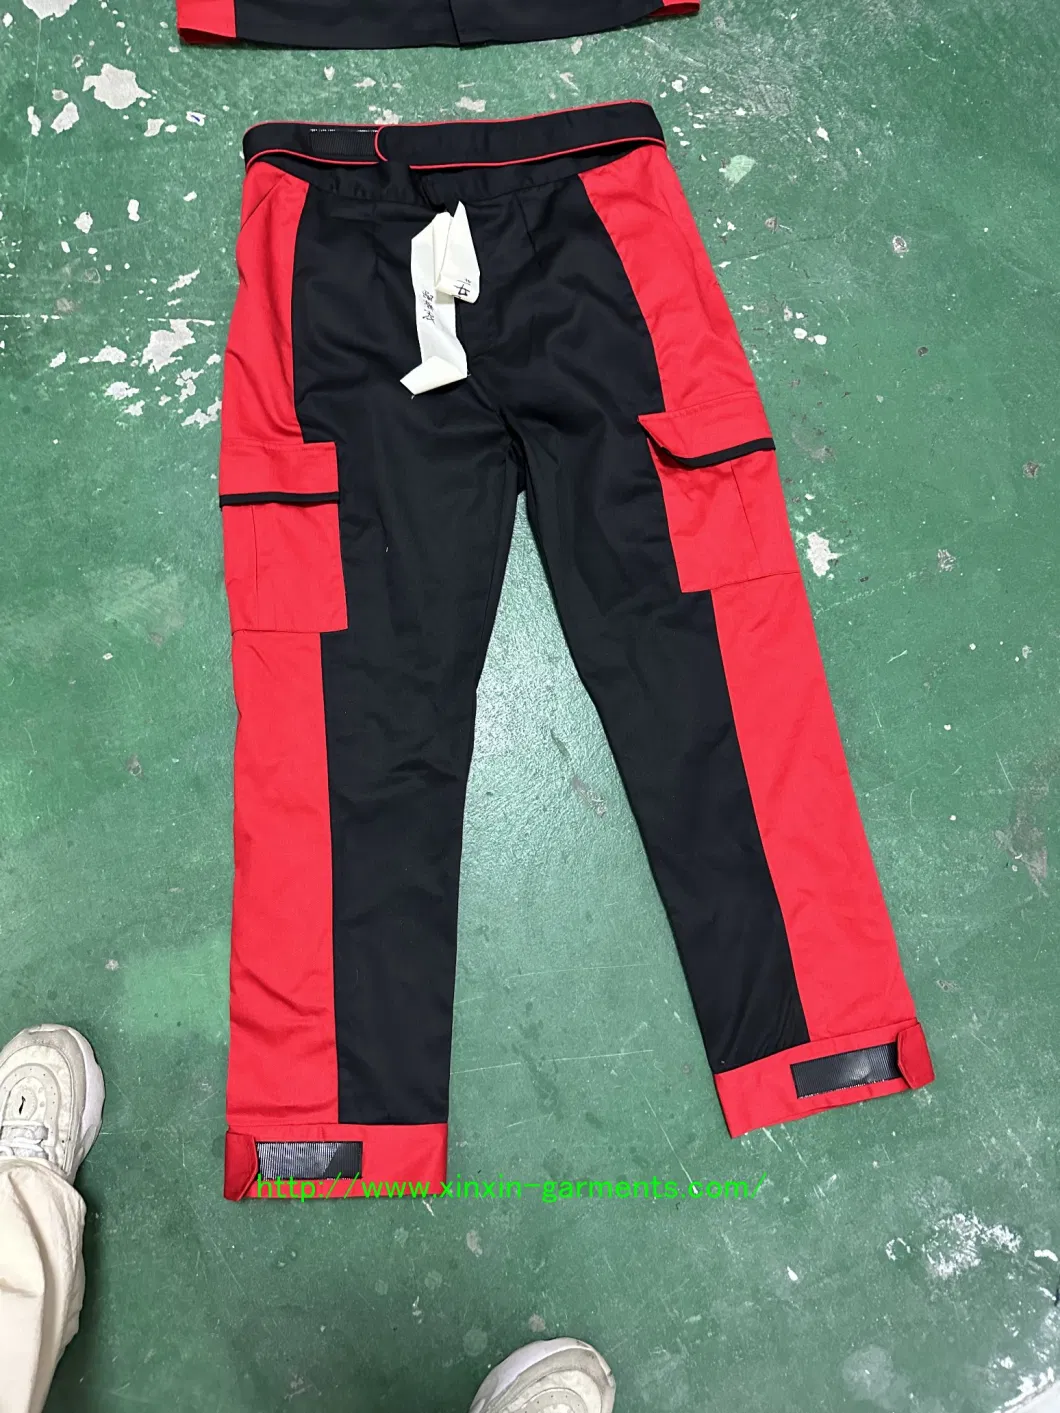 Classic Fit Free Draping High-Quality Fabric Work Uniform Source Manufacturer Customizable Work Clothes (W2329)